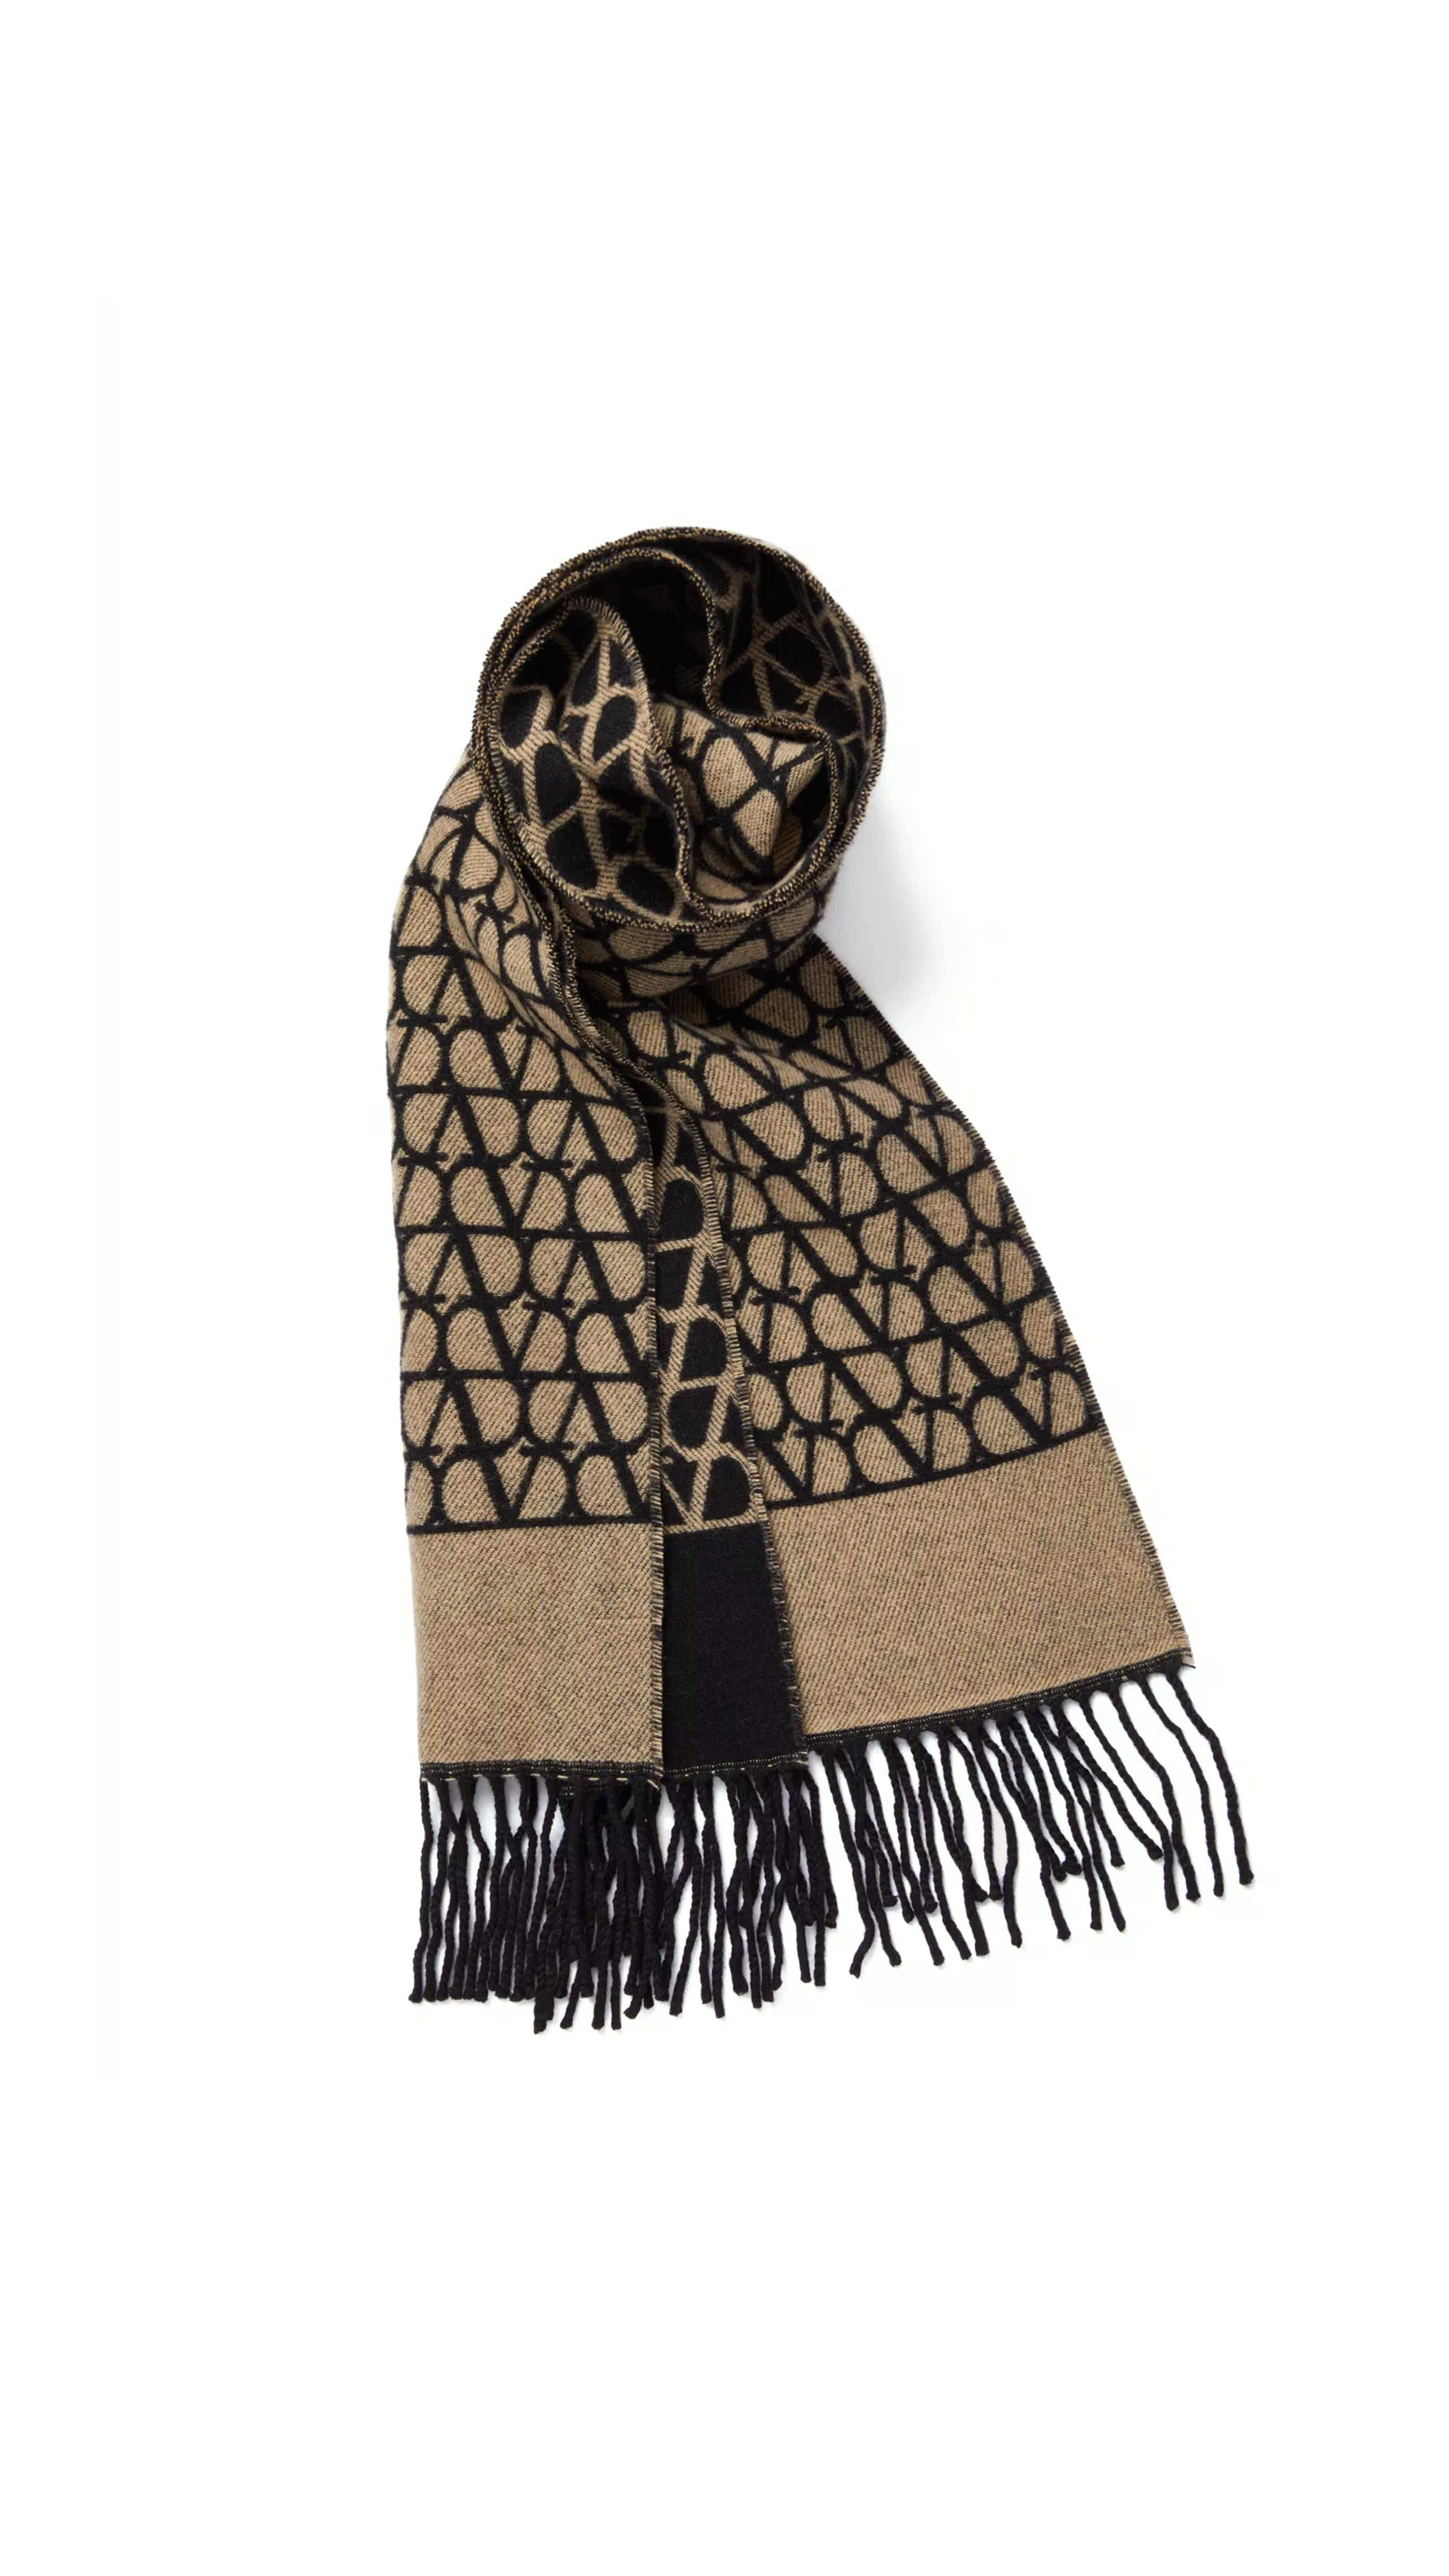 Toile Iconographe Wool and Cashmere Scarf - Beige/Black